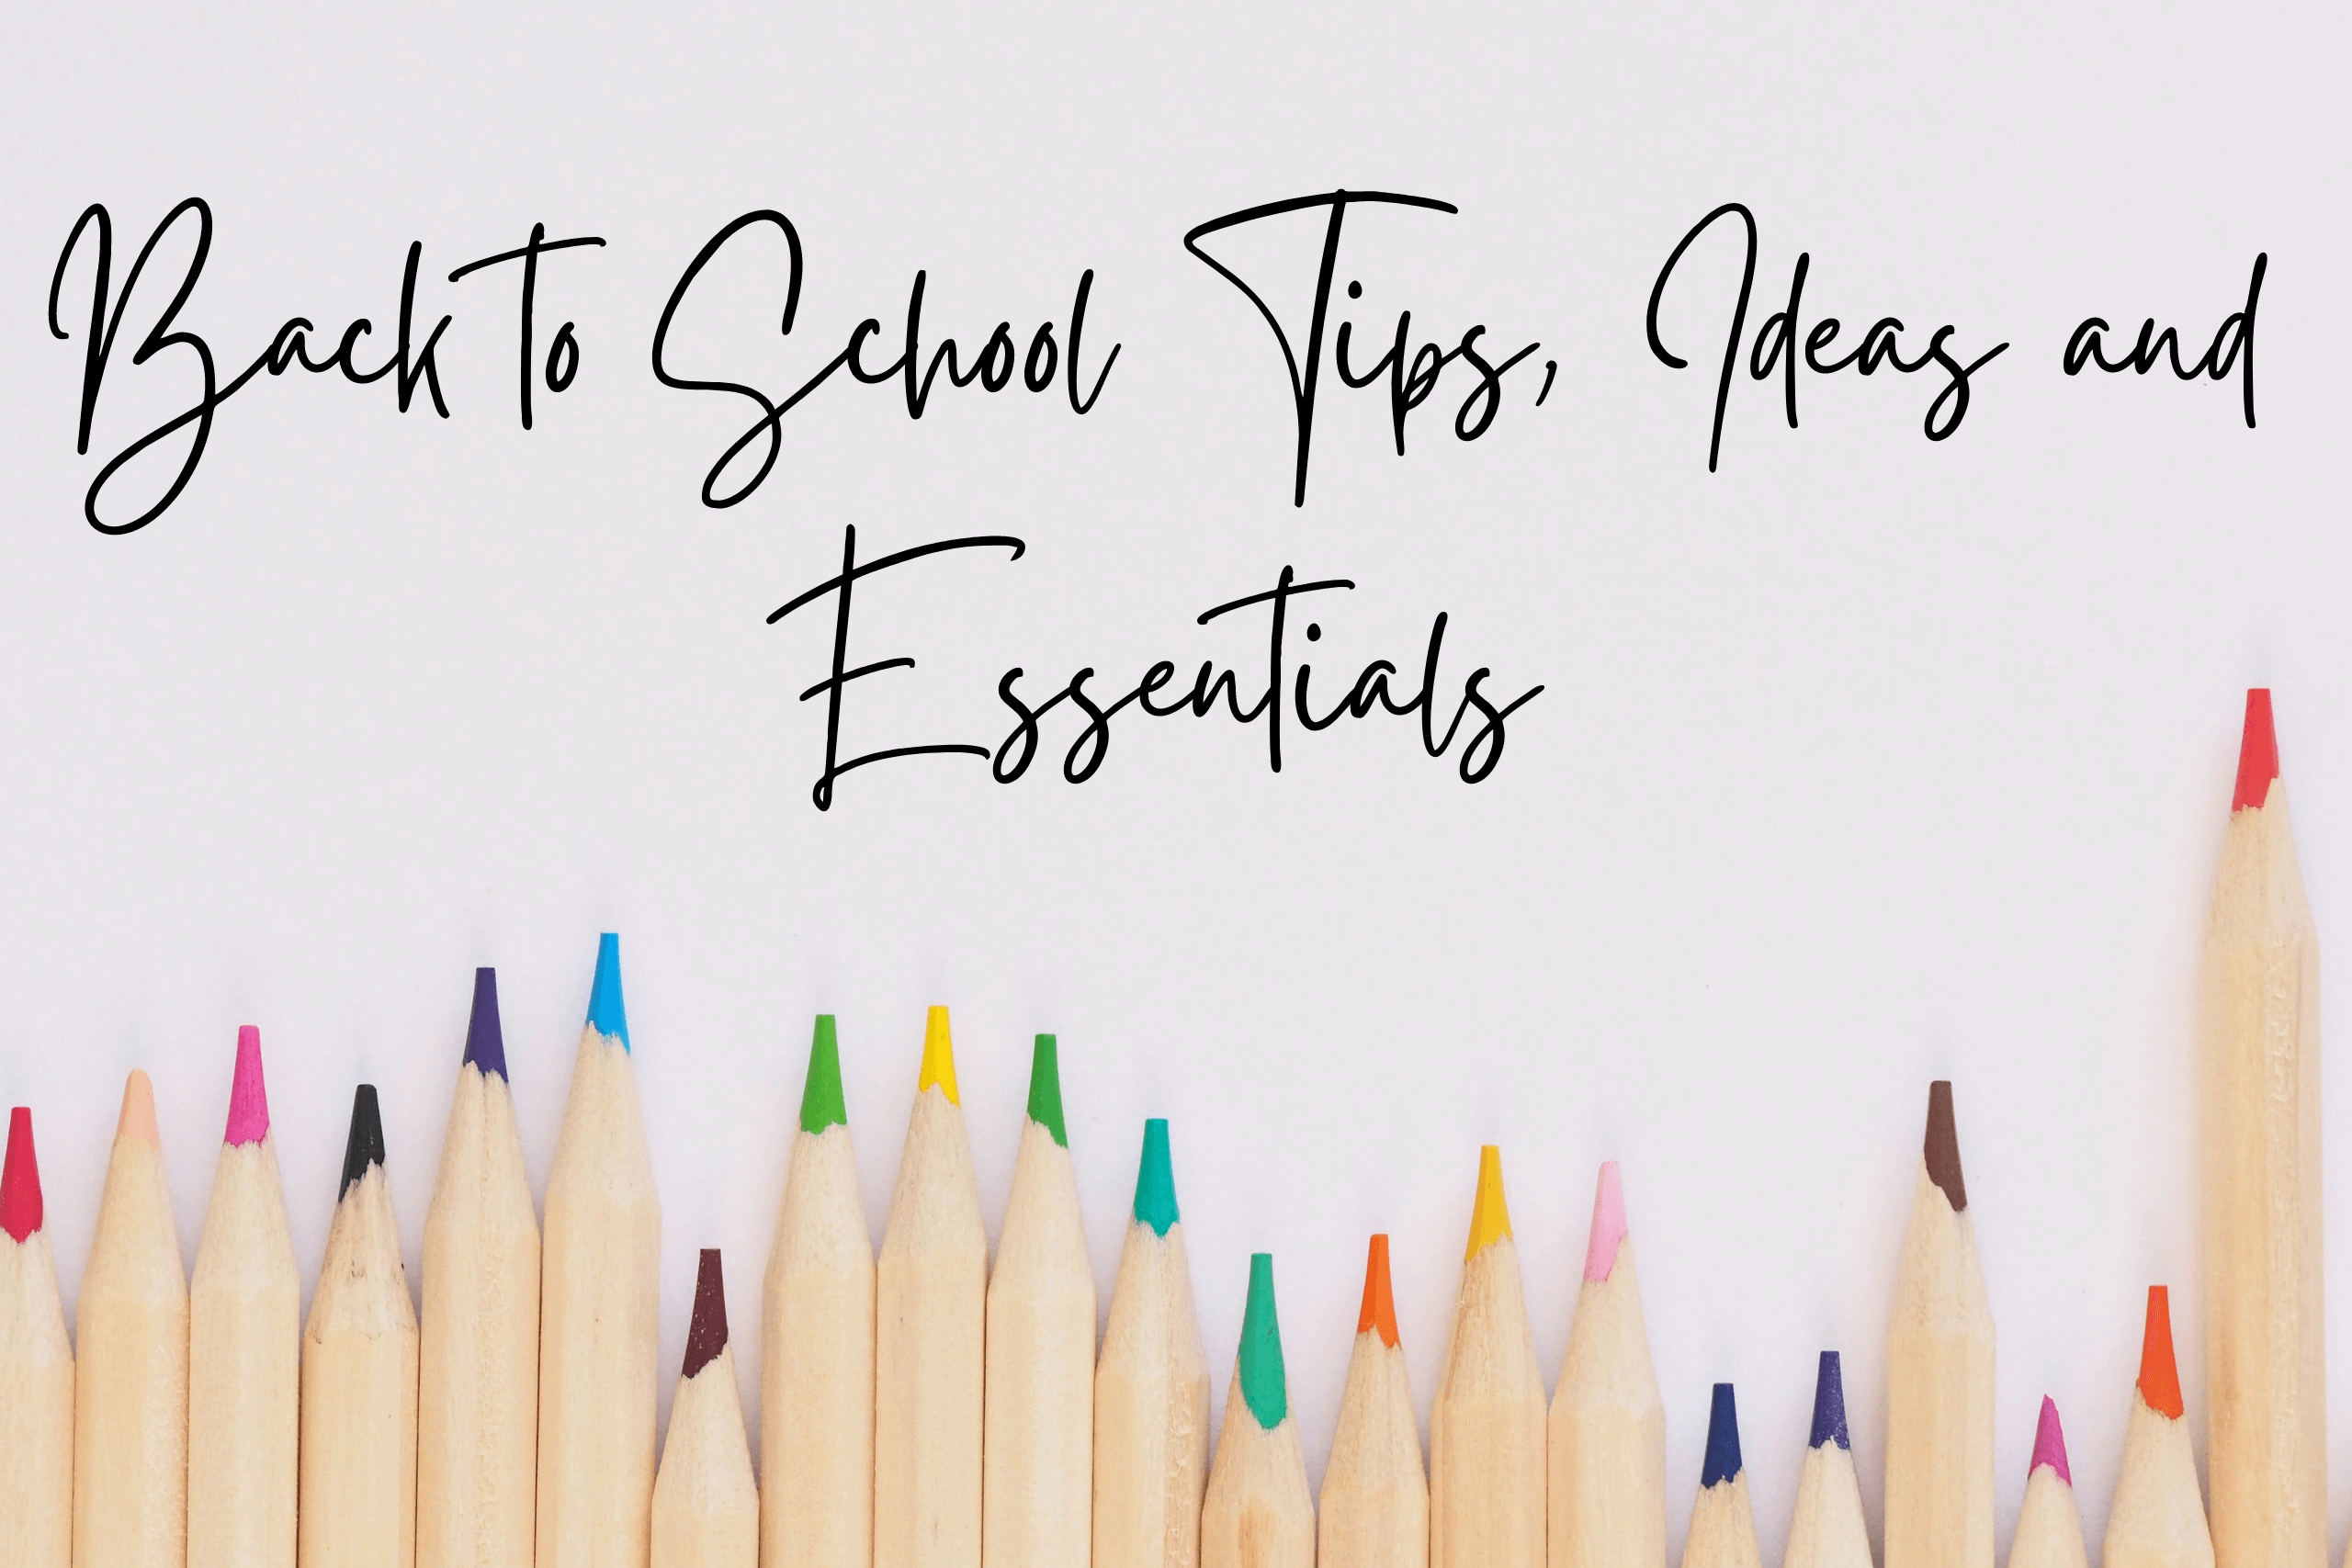 feature image showing colored pencils for back to school ideas